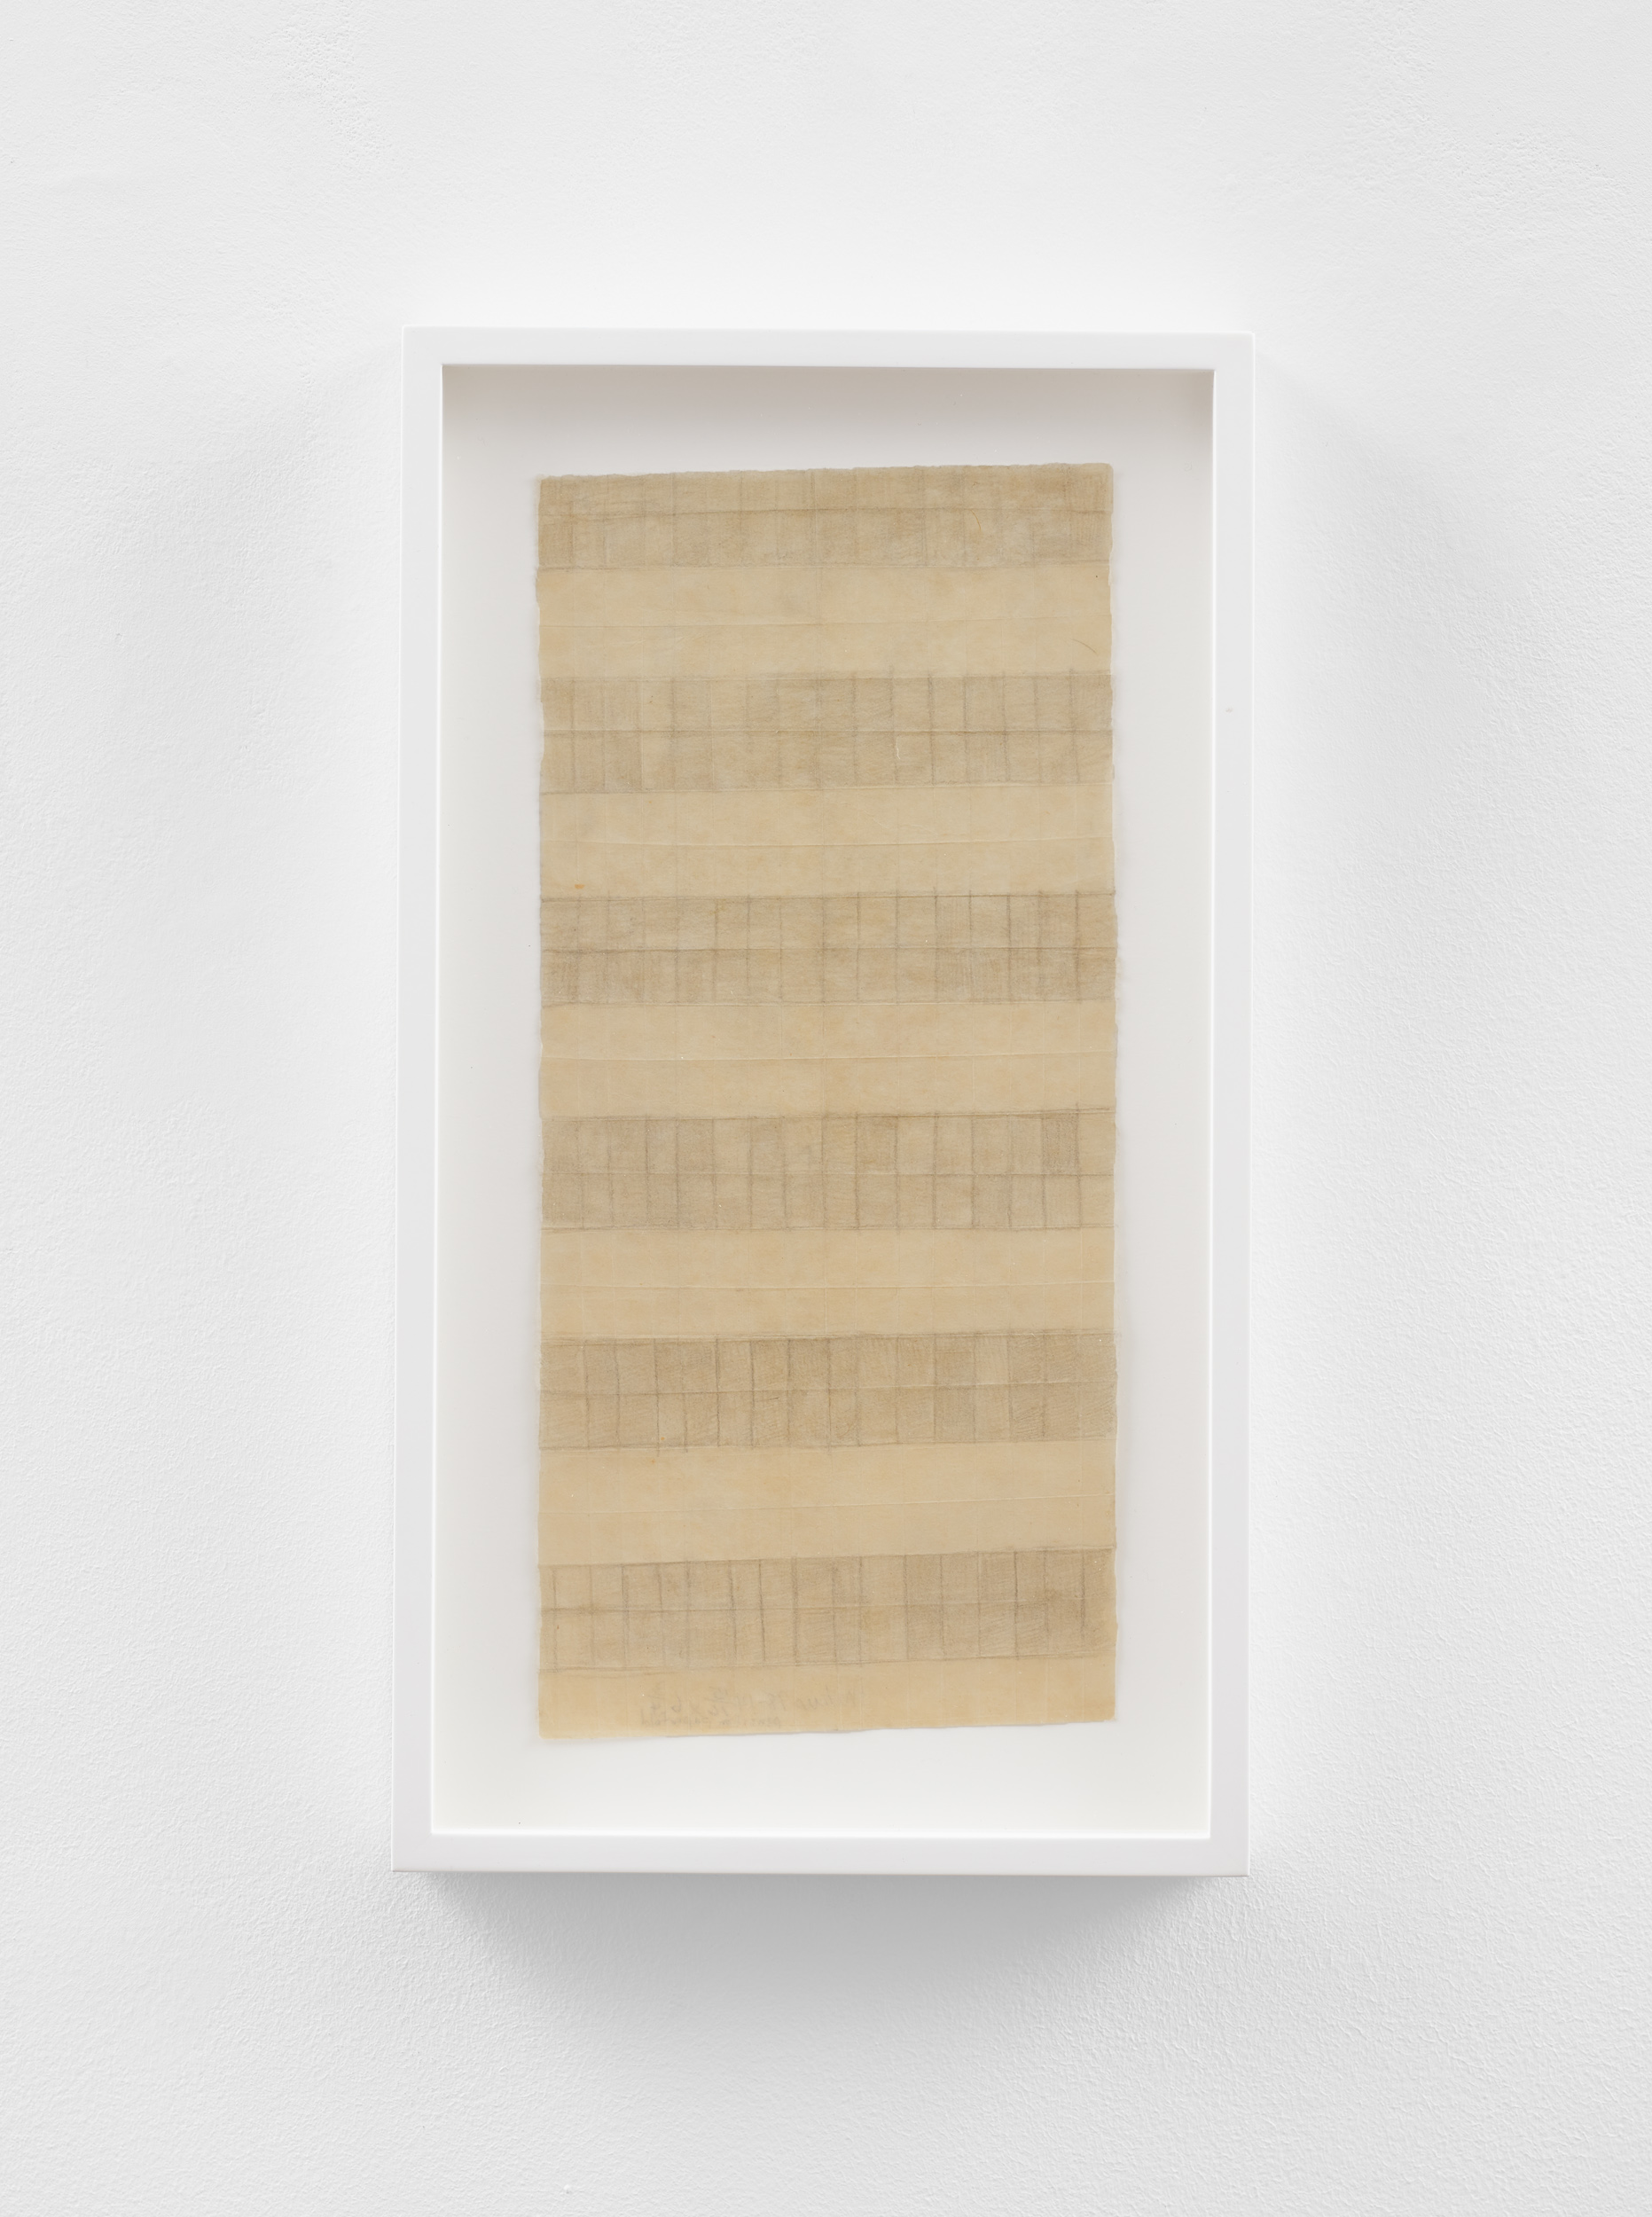 Eleanore Mikus's Untitled pencil on folded paper work